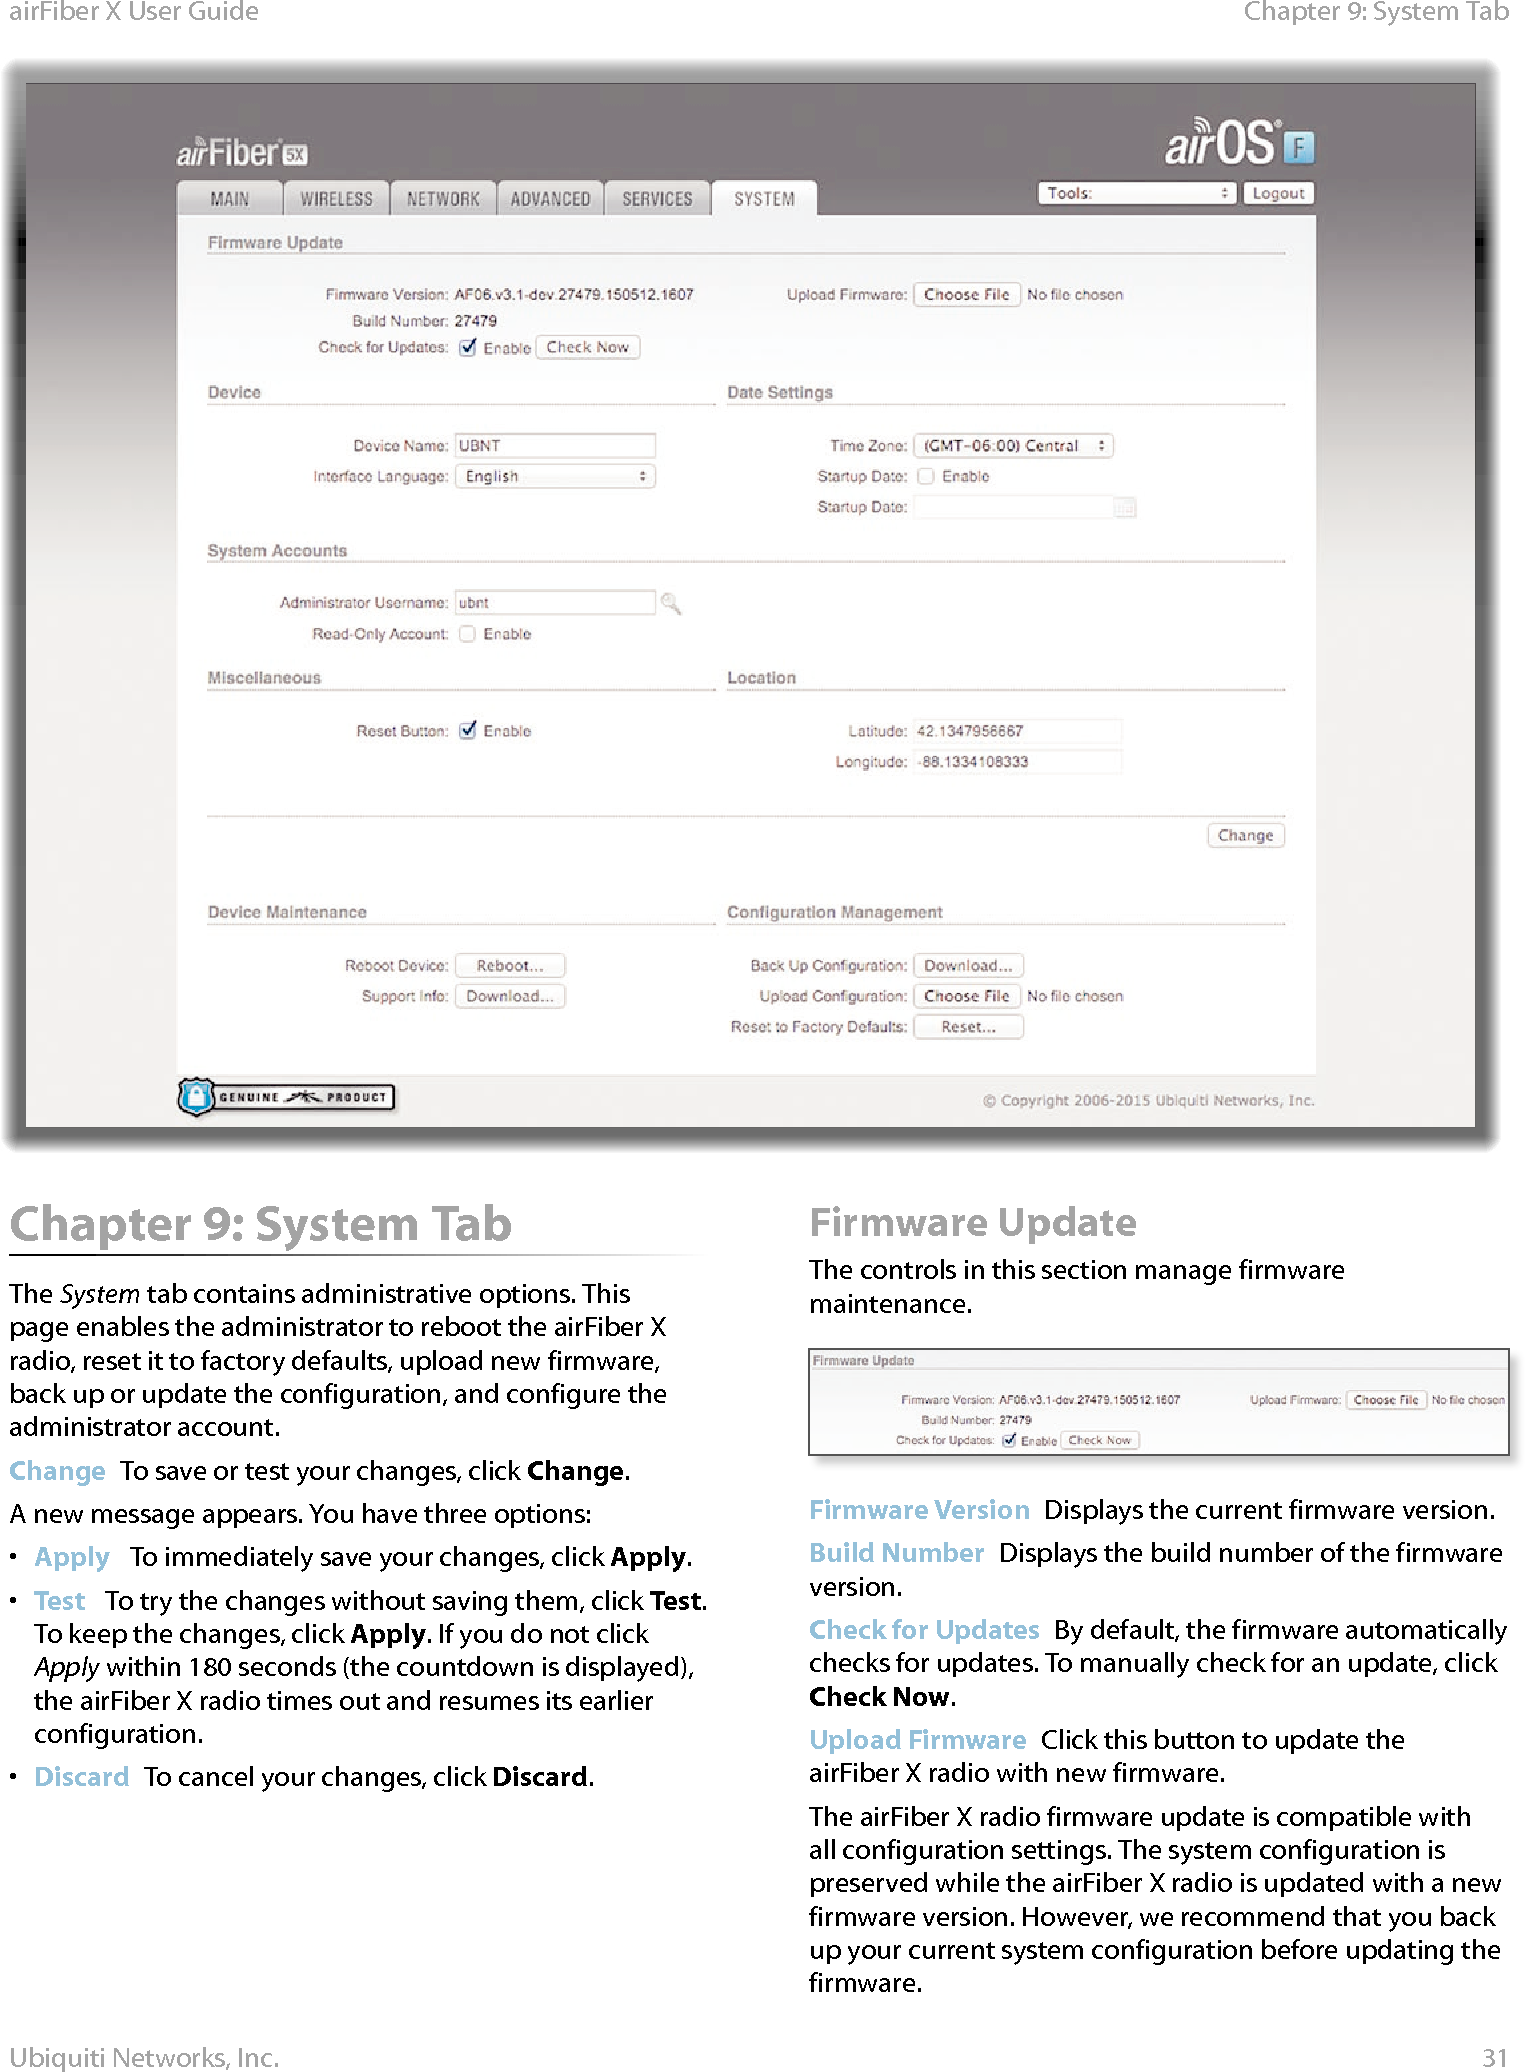 31Chapter 9: System TabairFiber X User GuideUbiquiti Networks, Inc.Chapter 9: System TabThe System tab contains administrative options. This page enables the administrator to reboot the airFiberX radio, reset it to factory defaults, upload new firmware, back up or update the configuration, and configure the administrator account.Change  To save or test your changes, click Change.A new message appears. You have three options:•  Apply   To immediately save your changes, click Apply.•  Test   To try the changes without saving them, click Test. To keep the changes, click Apply. If you do not click Apply within 180 seconds (the countdown is displayed), the airFiberX radio times out and resumes its earlier configuration.•  Discard  To cancel your changes, click Discard.Firmware UpdateThe controls in this section manage firmware maintenance.Firmware Version  Displays the current firmware version.Build Number  Displays the build number of the firmware version.Check for Updates  By default, the firmware automatically checks for updates. To manually check for an update, click Check Now.Upload Firmware  Click this button to update the airFiberX radio with new firmware.The airFiberX radio firmware update is compatible with all configuration settings. The system configuration is preserved while the airFiberX radio is updated with a new firmware version. However, we recommend that you back up your current system configuration before updating the firmware. 